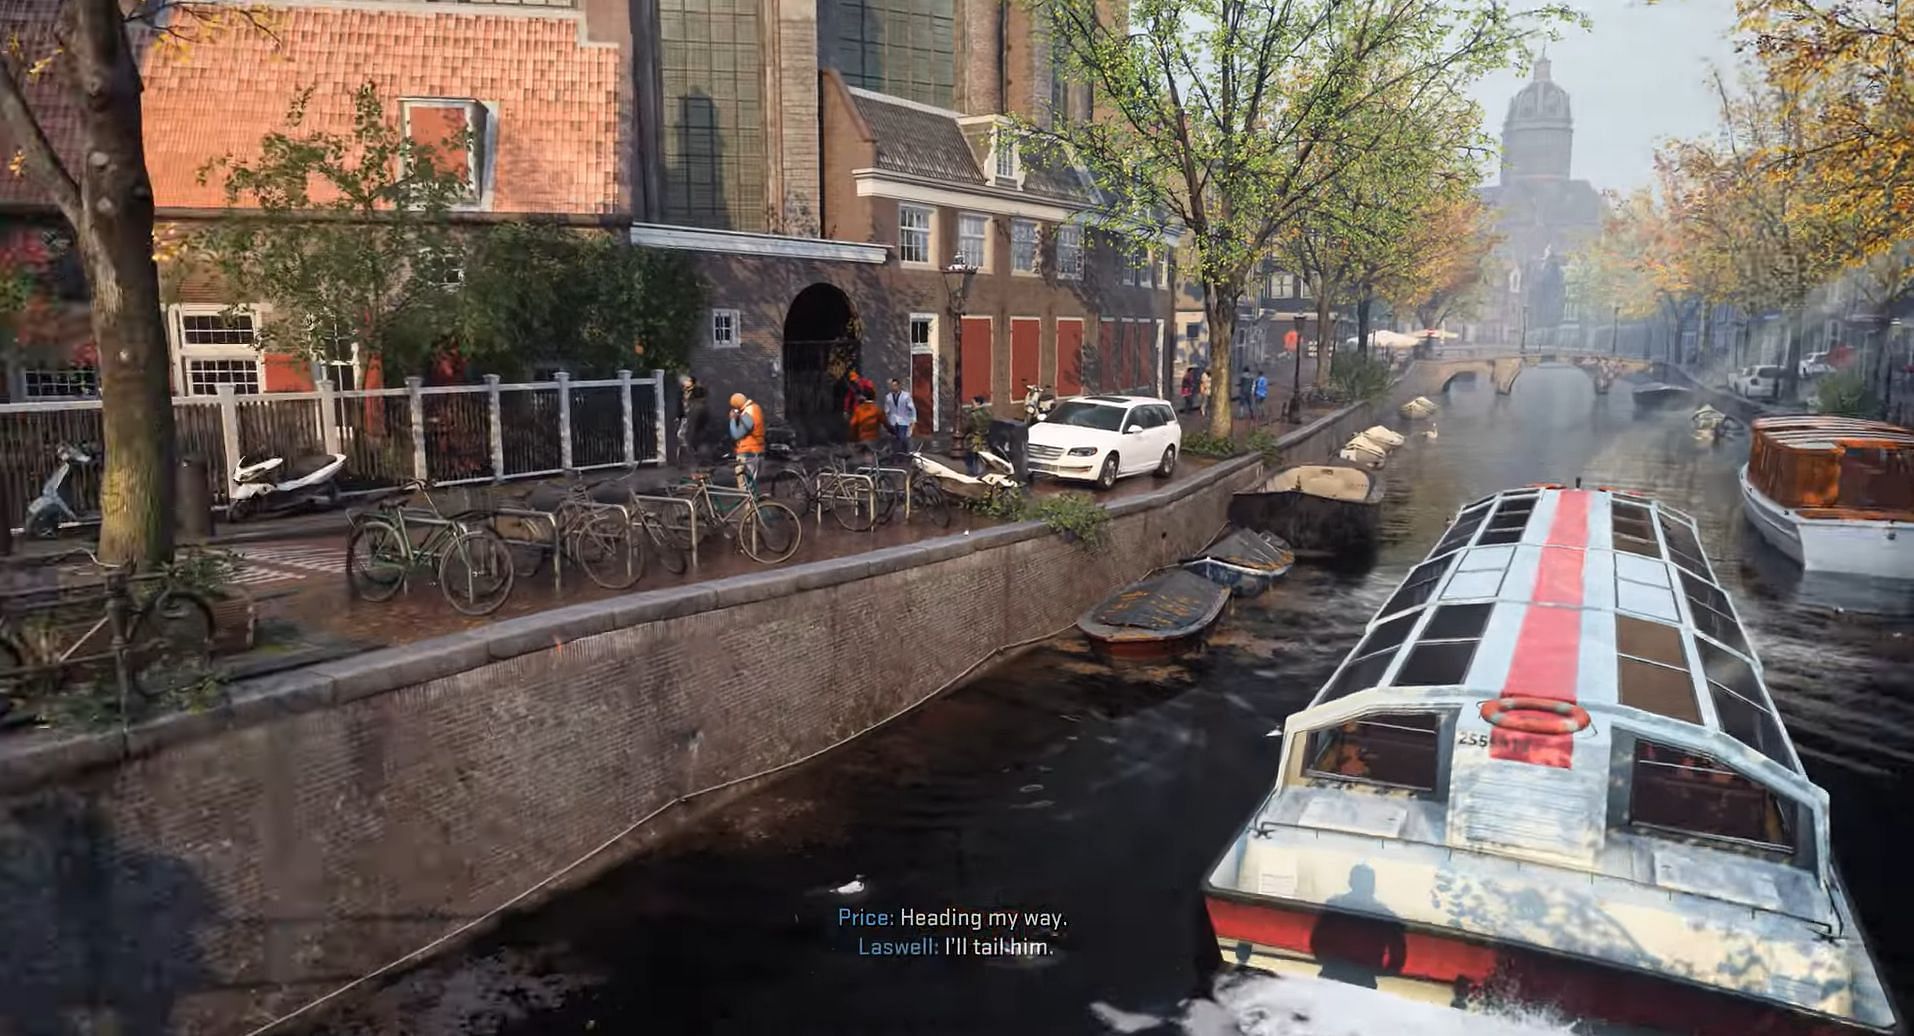 The Modern Warfare 2 campaign offers much more than a photorealistic  Amsterdam